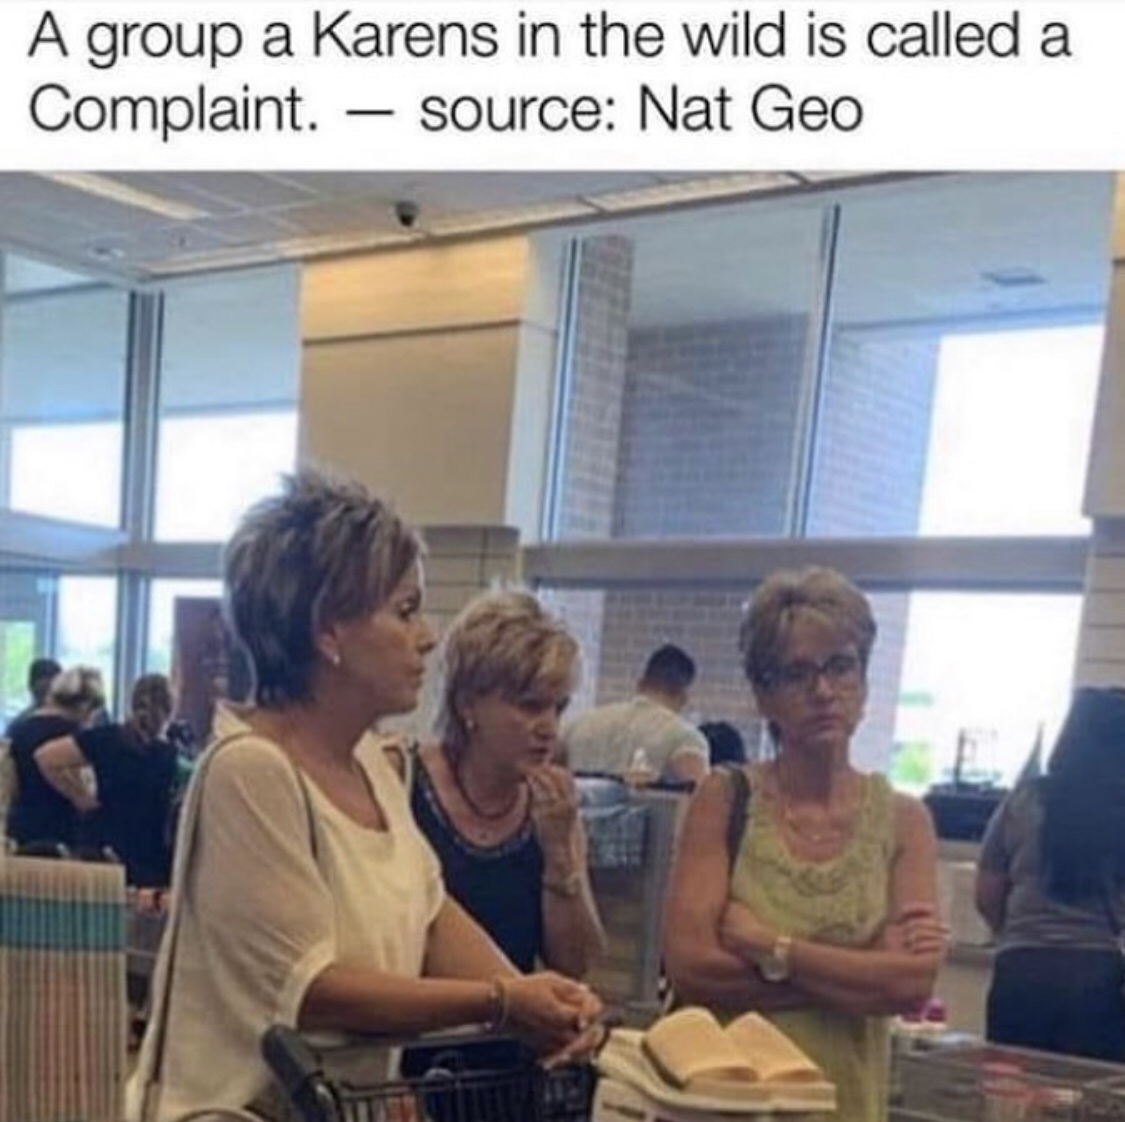 conversation - A group a Karens in the wild is called a Complaint. source Nat Geo